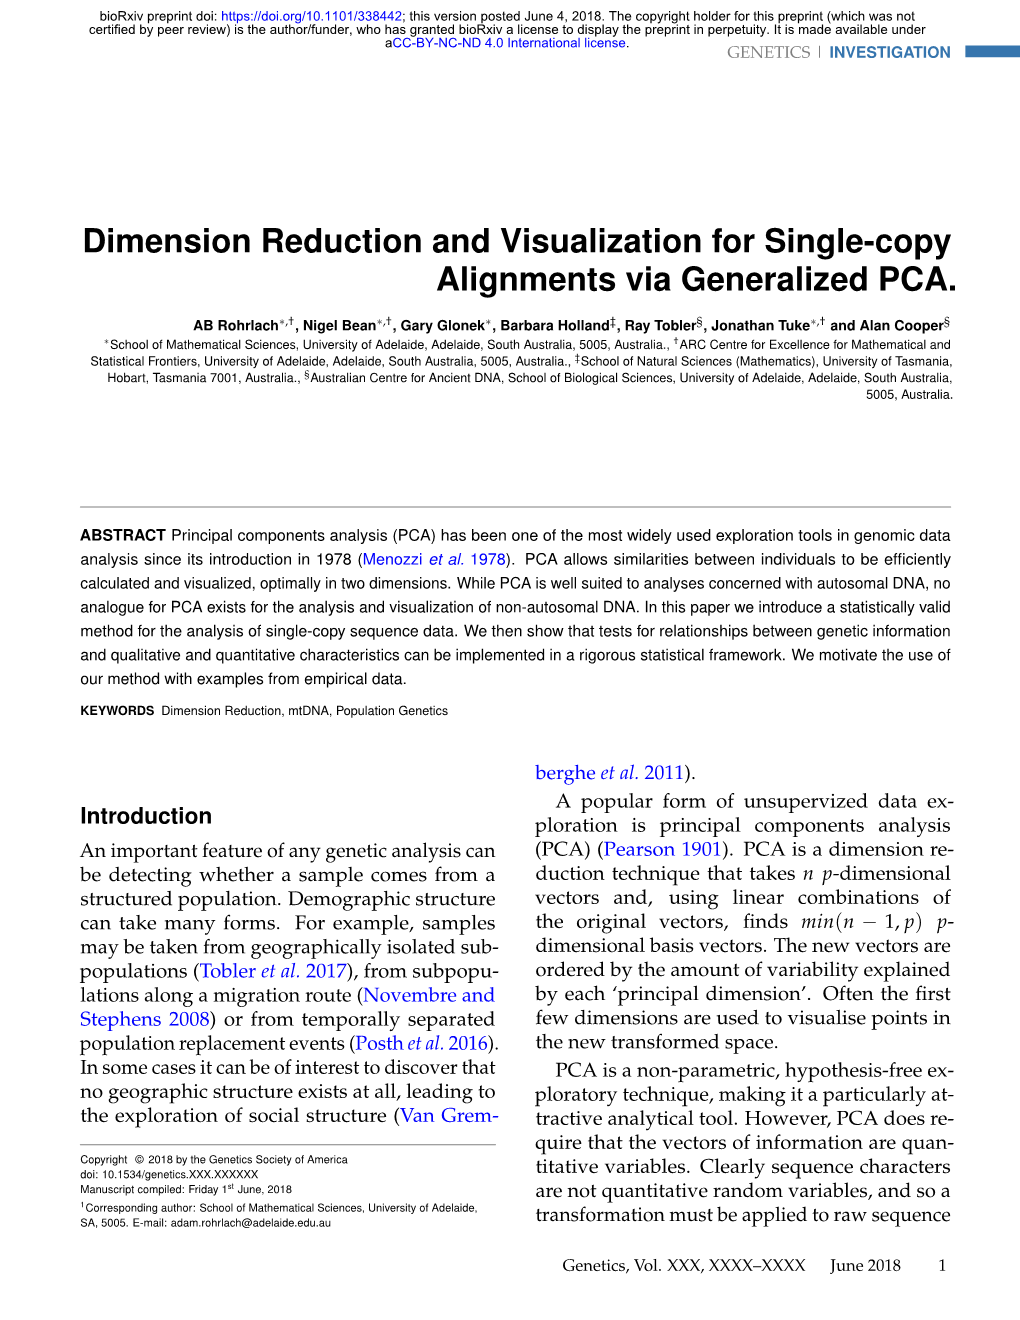 Dimension Reduction and Visualization for Single-Copy Alignments Via Generalized PCA